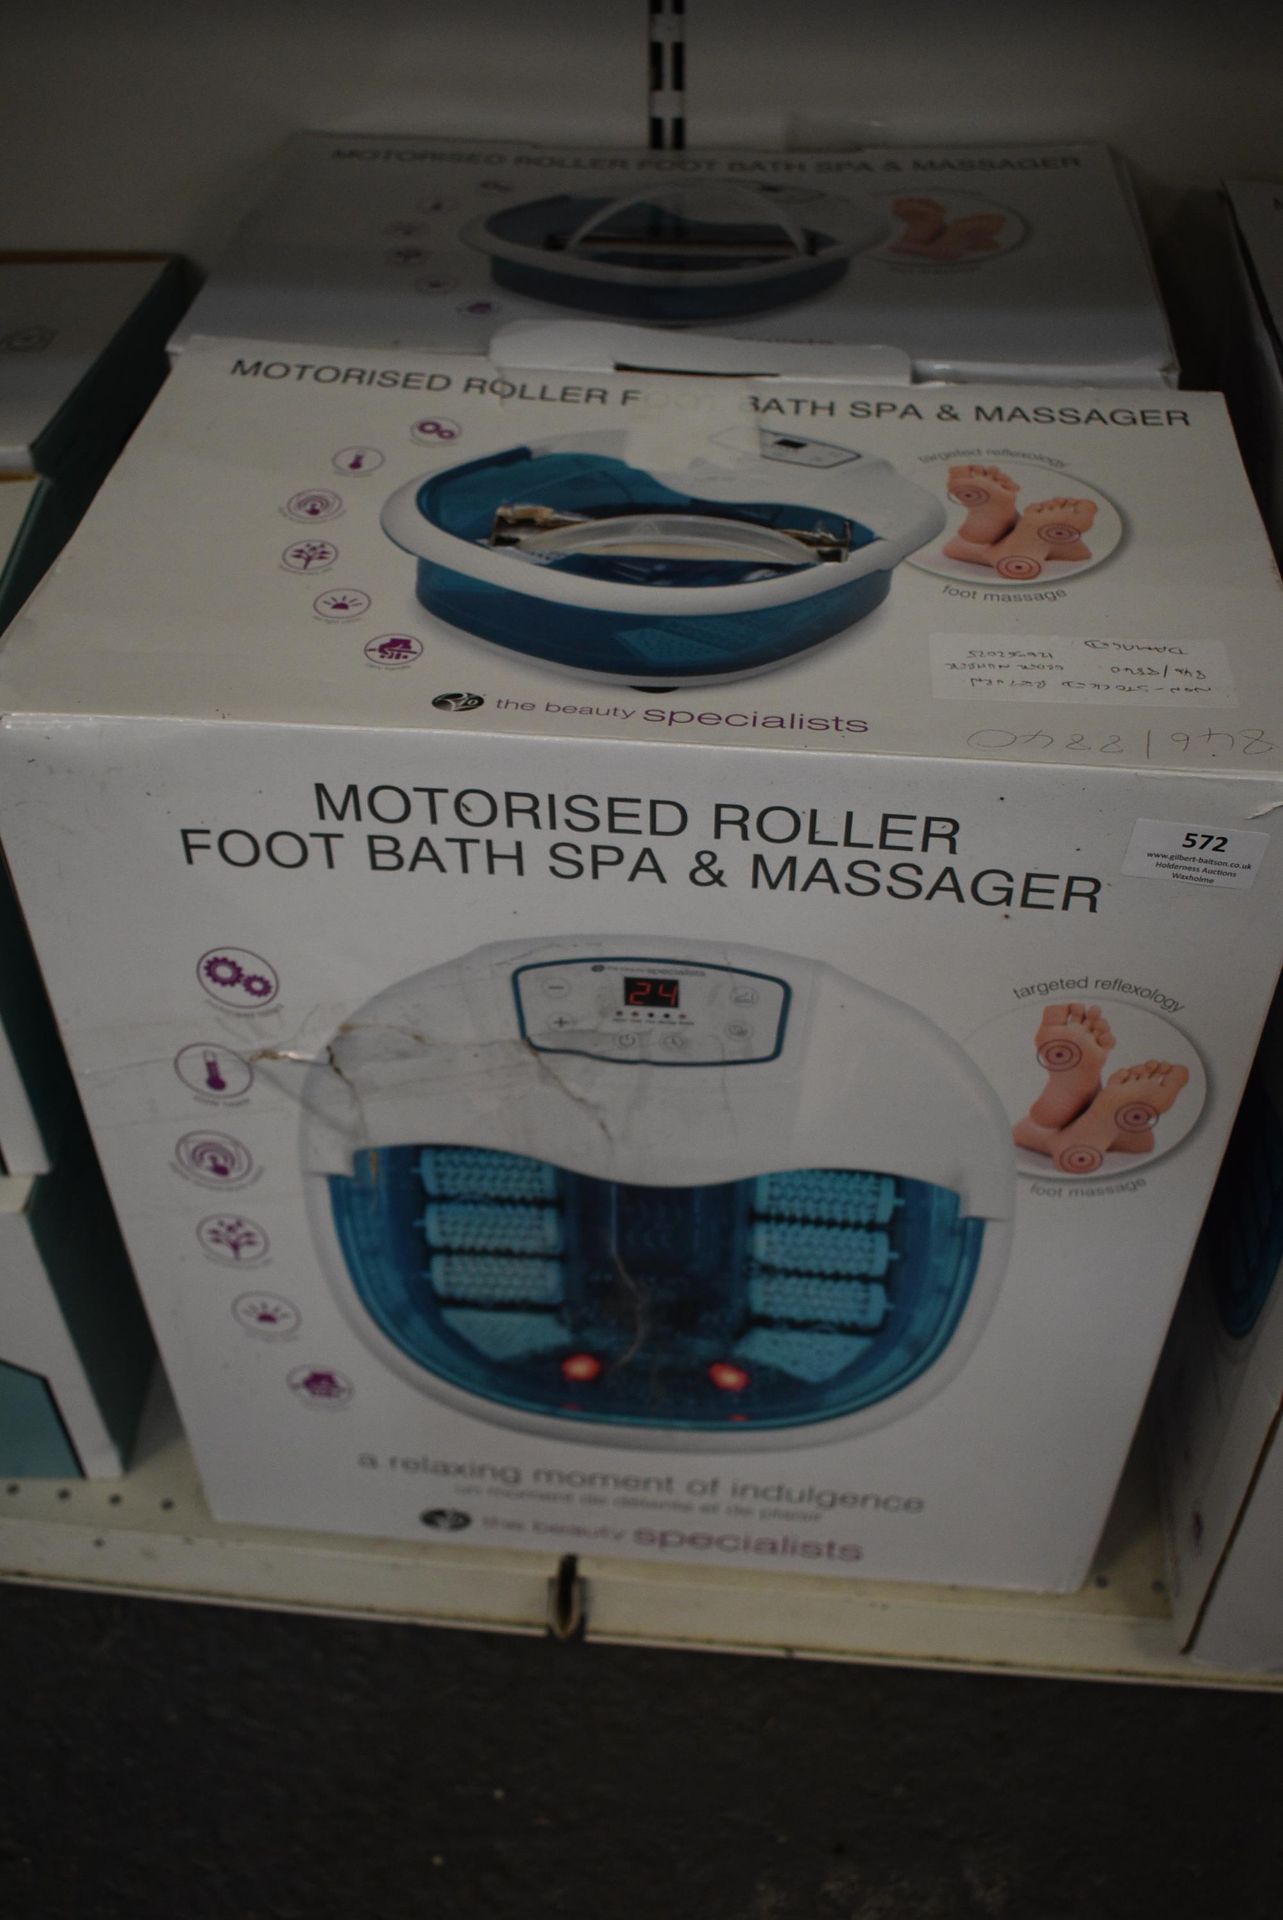 Two Motorised Roller Foot Bath Spa & Massagers